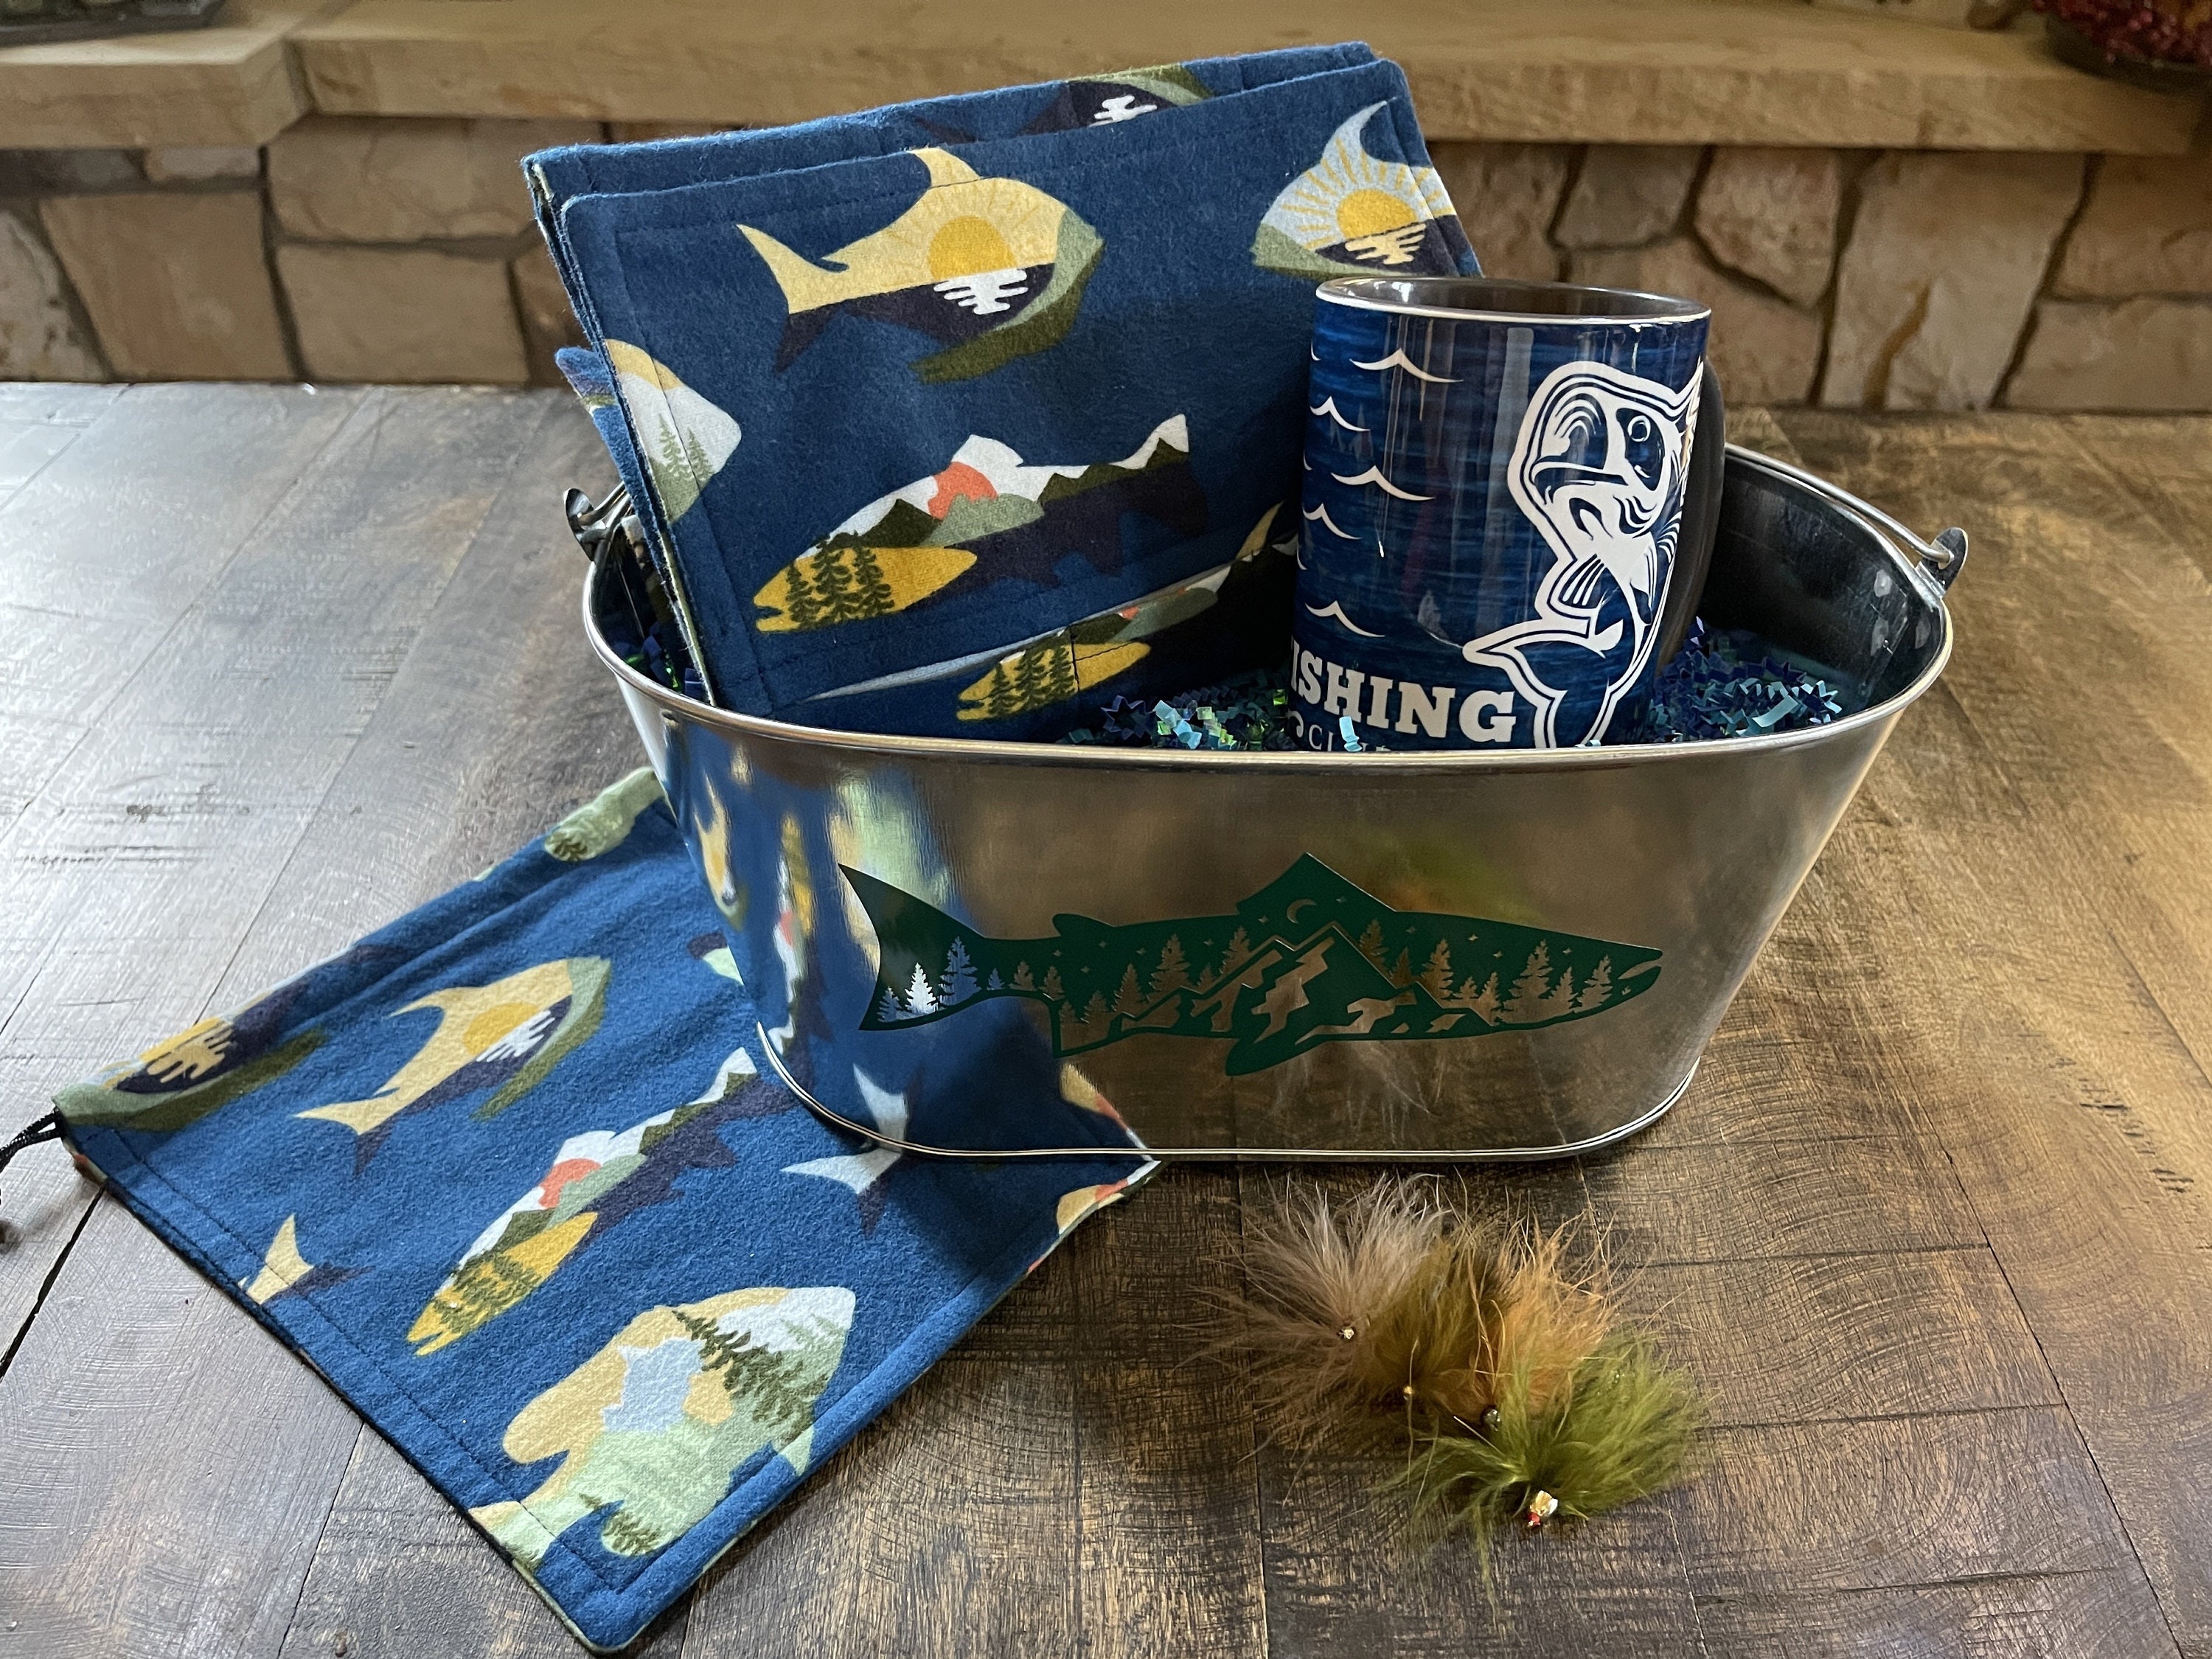 Fishing Creel Gift Basket Jam-Packed with Useful Fishing Equipment, Sweet Treats and Novelty Items | Father's Day | Gifts for Him